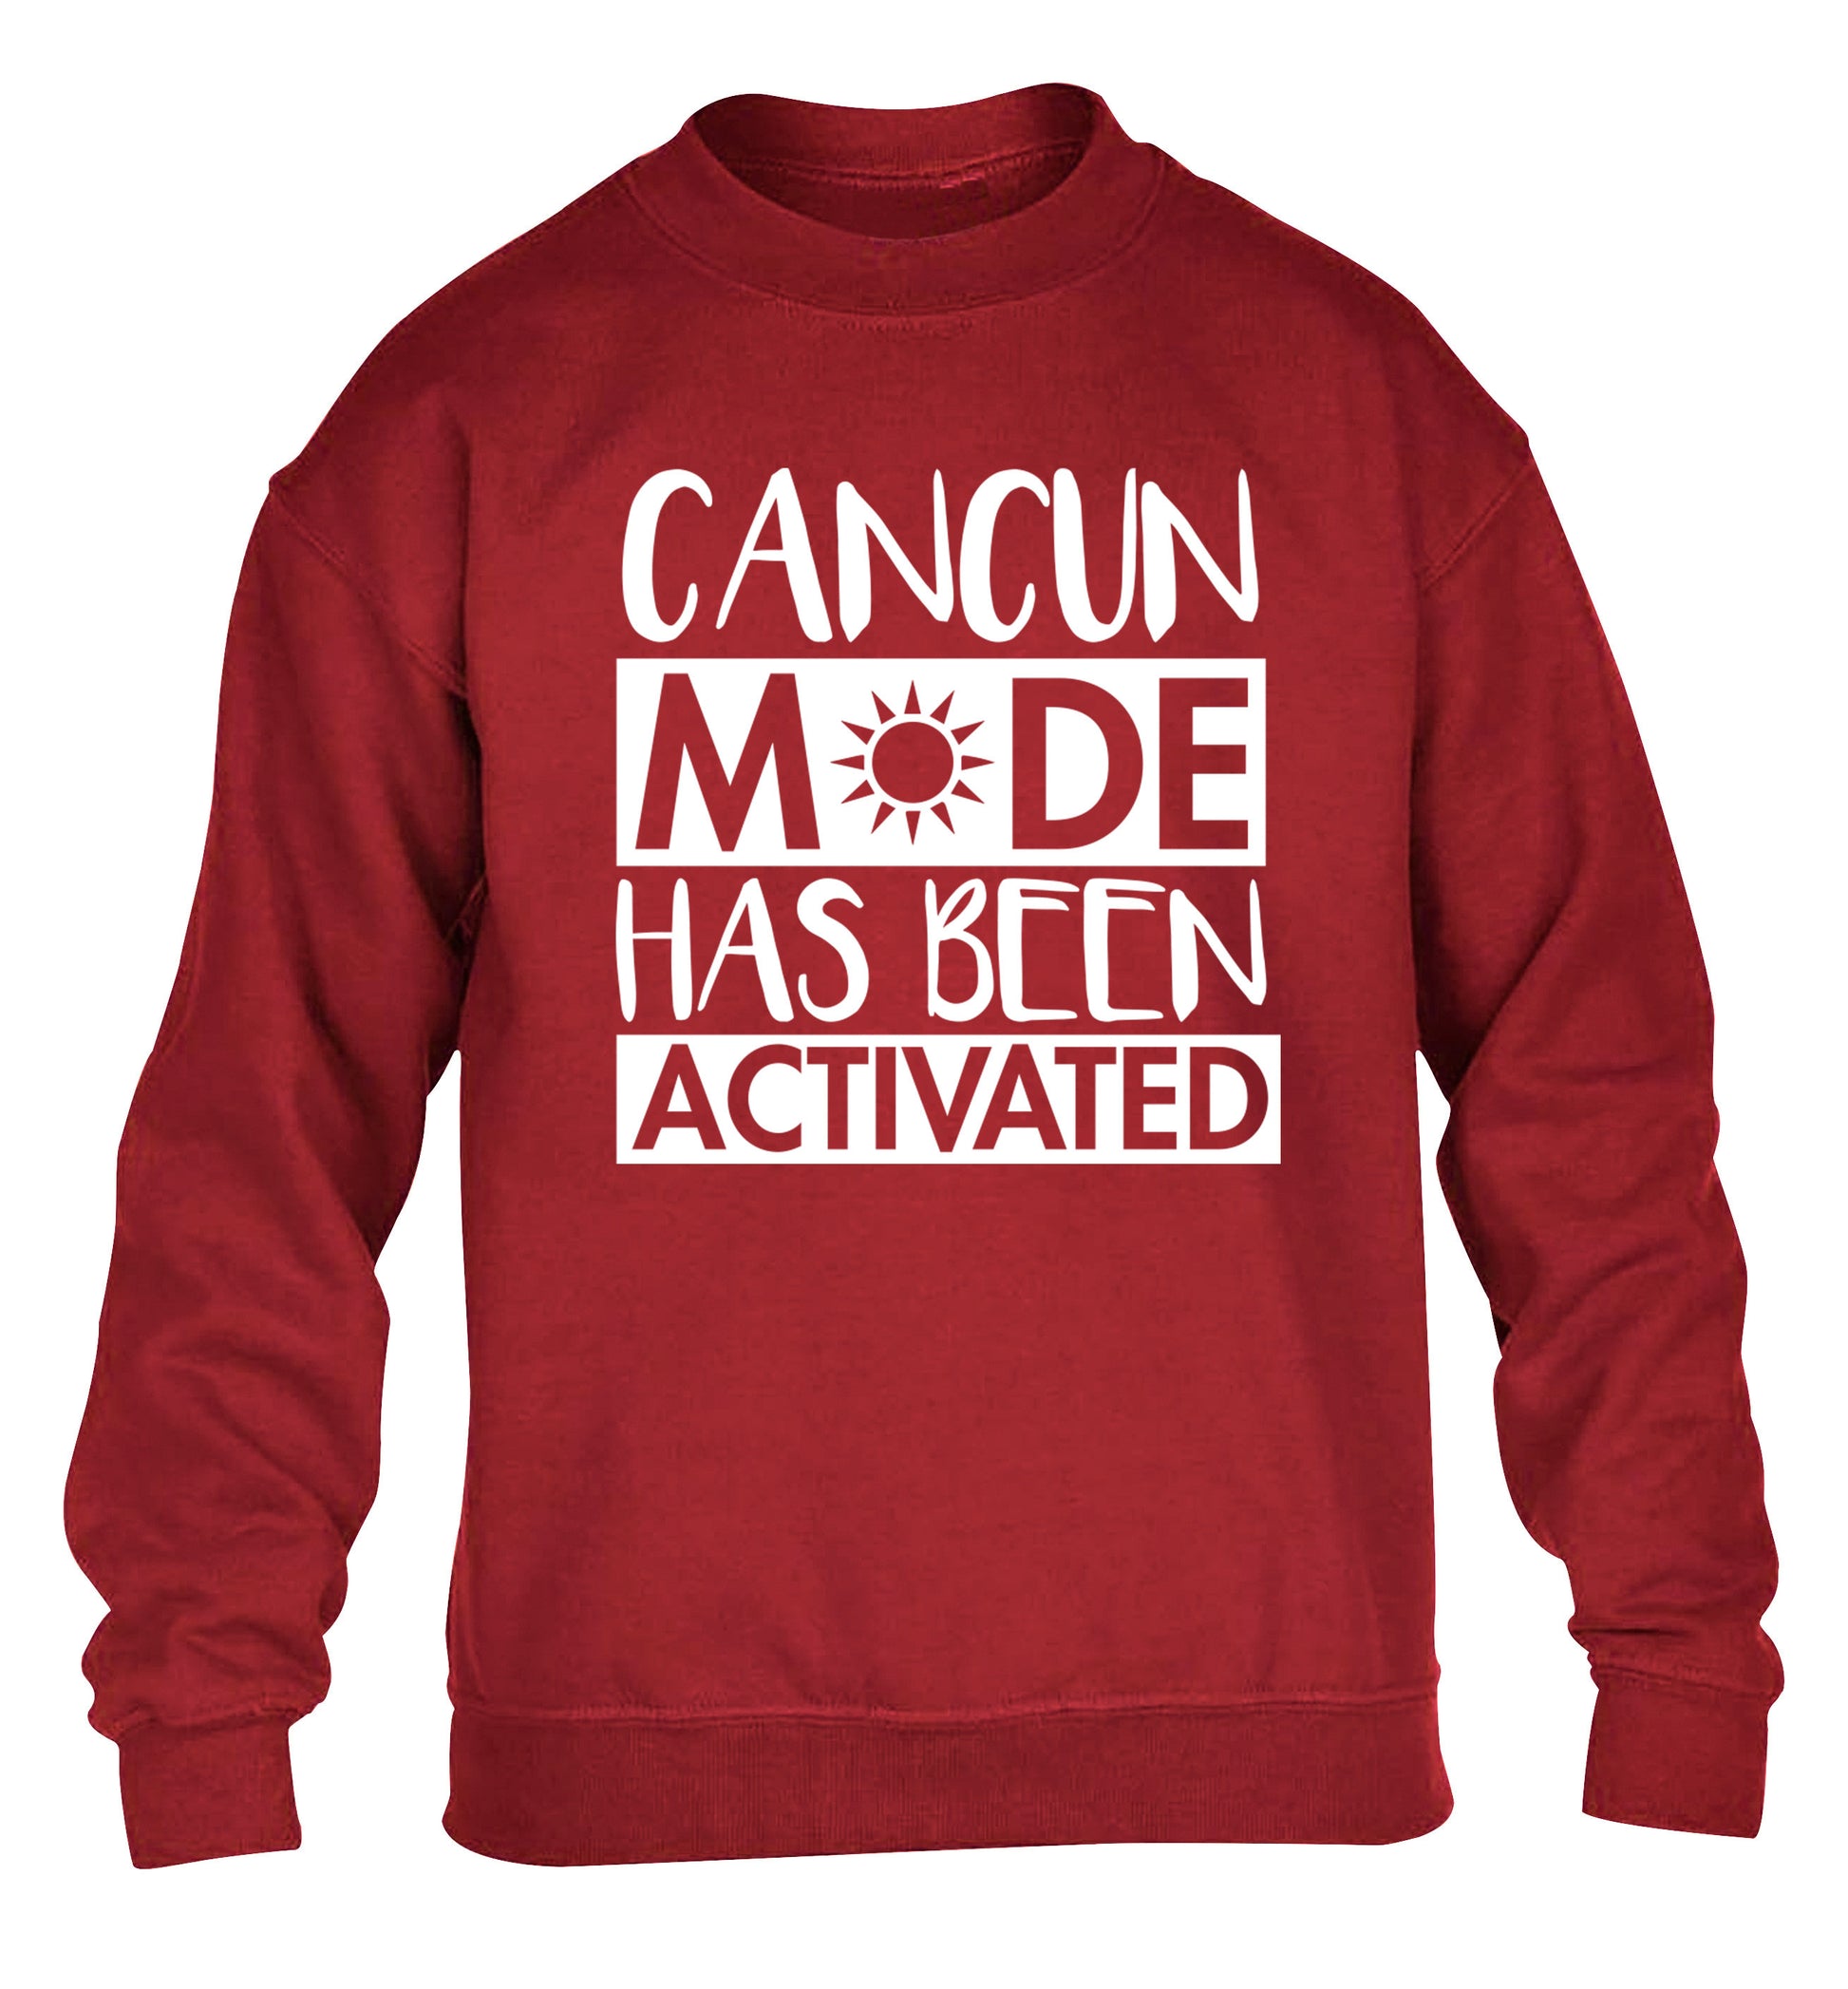 Cancun mode has been activated children's grey sweater 12-14 Years